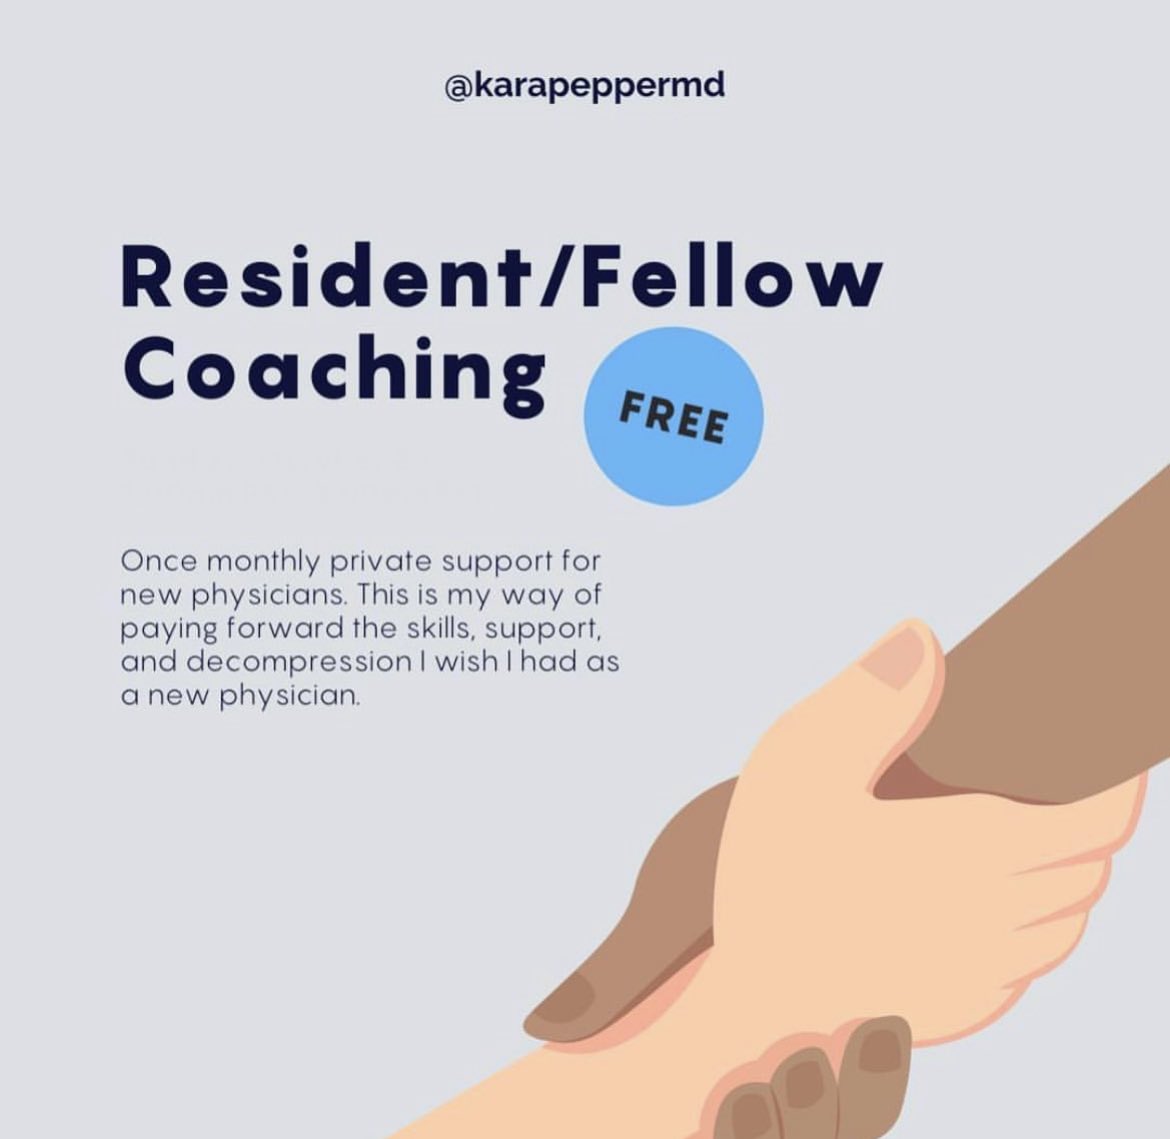 Sunday March 26 6:00 pm EST. 
We meet monthly. 
Coaching for residents/fellows across the country. 
Join us and bring a friend. 
Sign up link in my bio. 

#physiciancoaching #burnoutprevention #physicianwellness 
#medtwitter